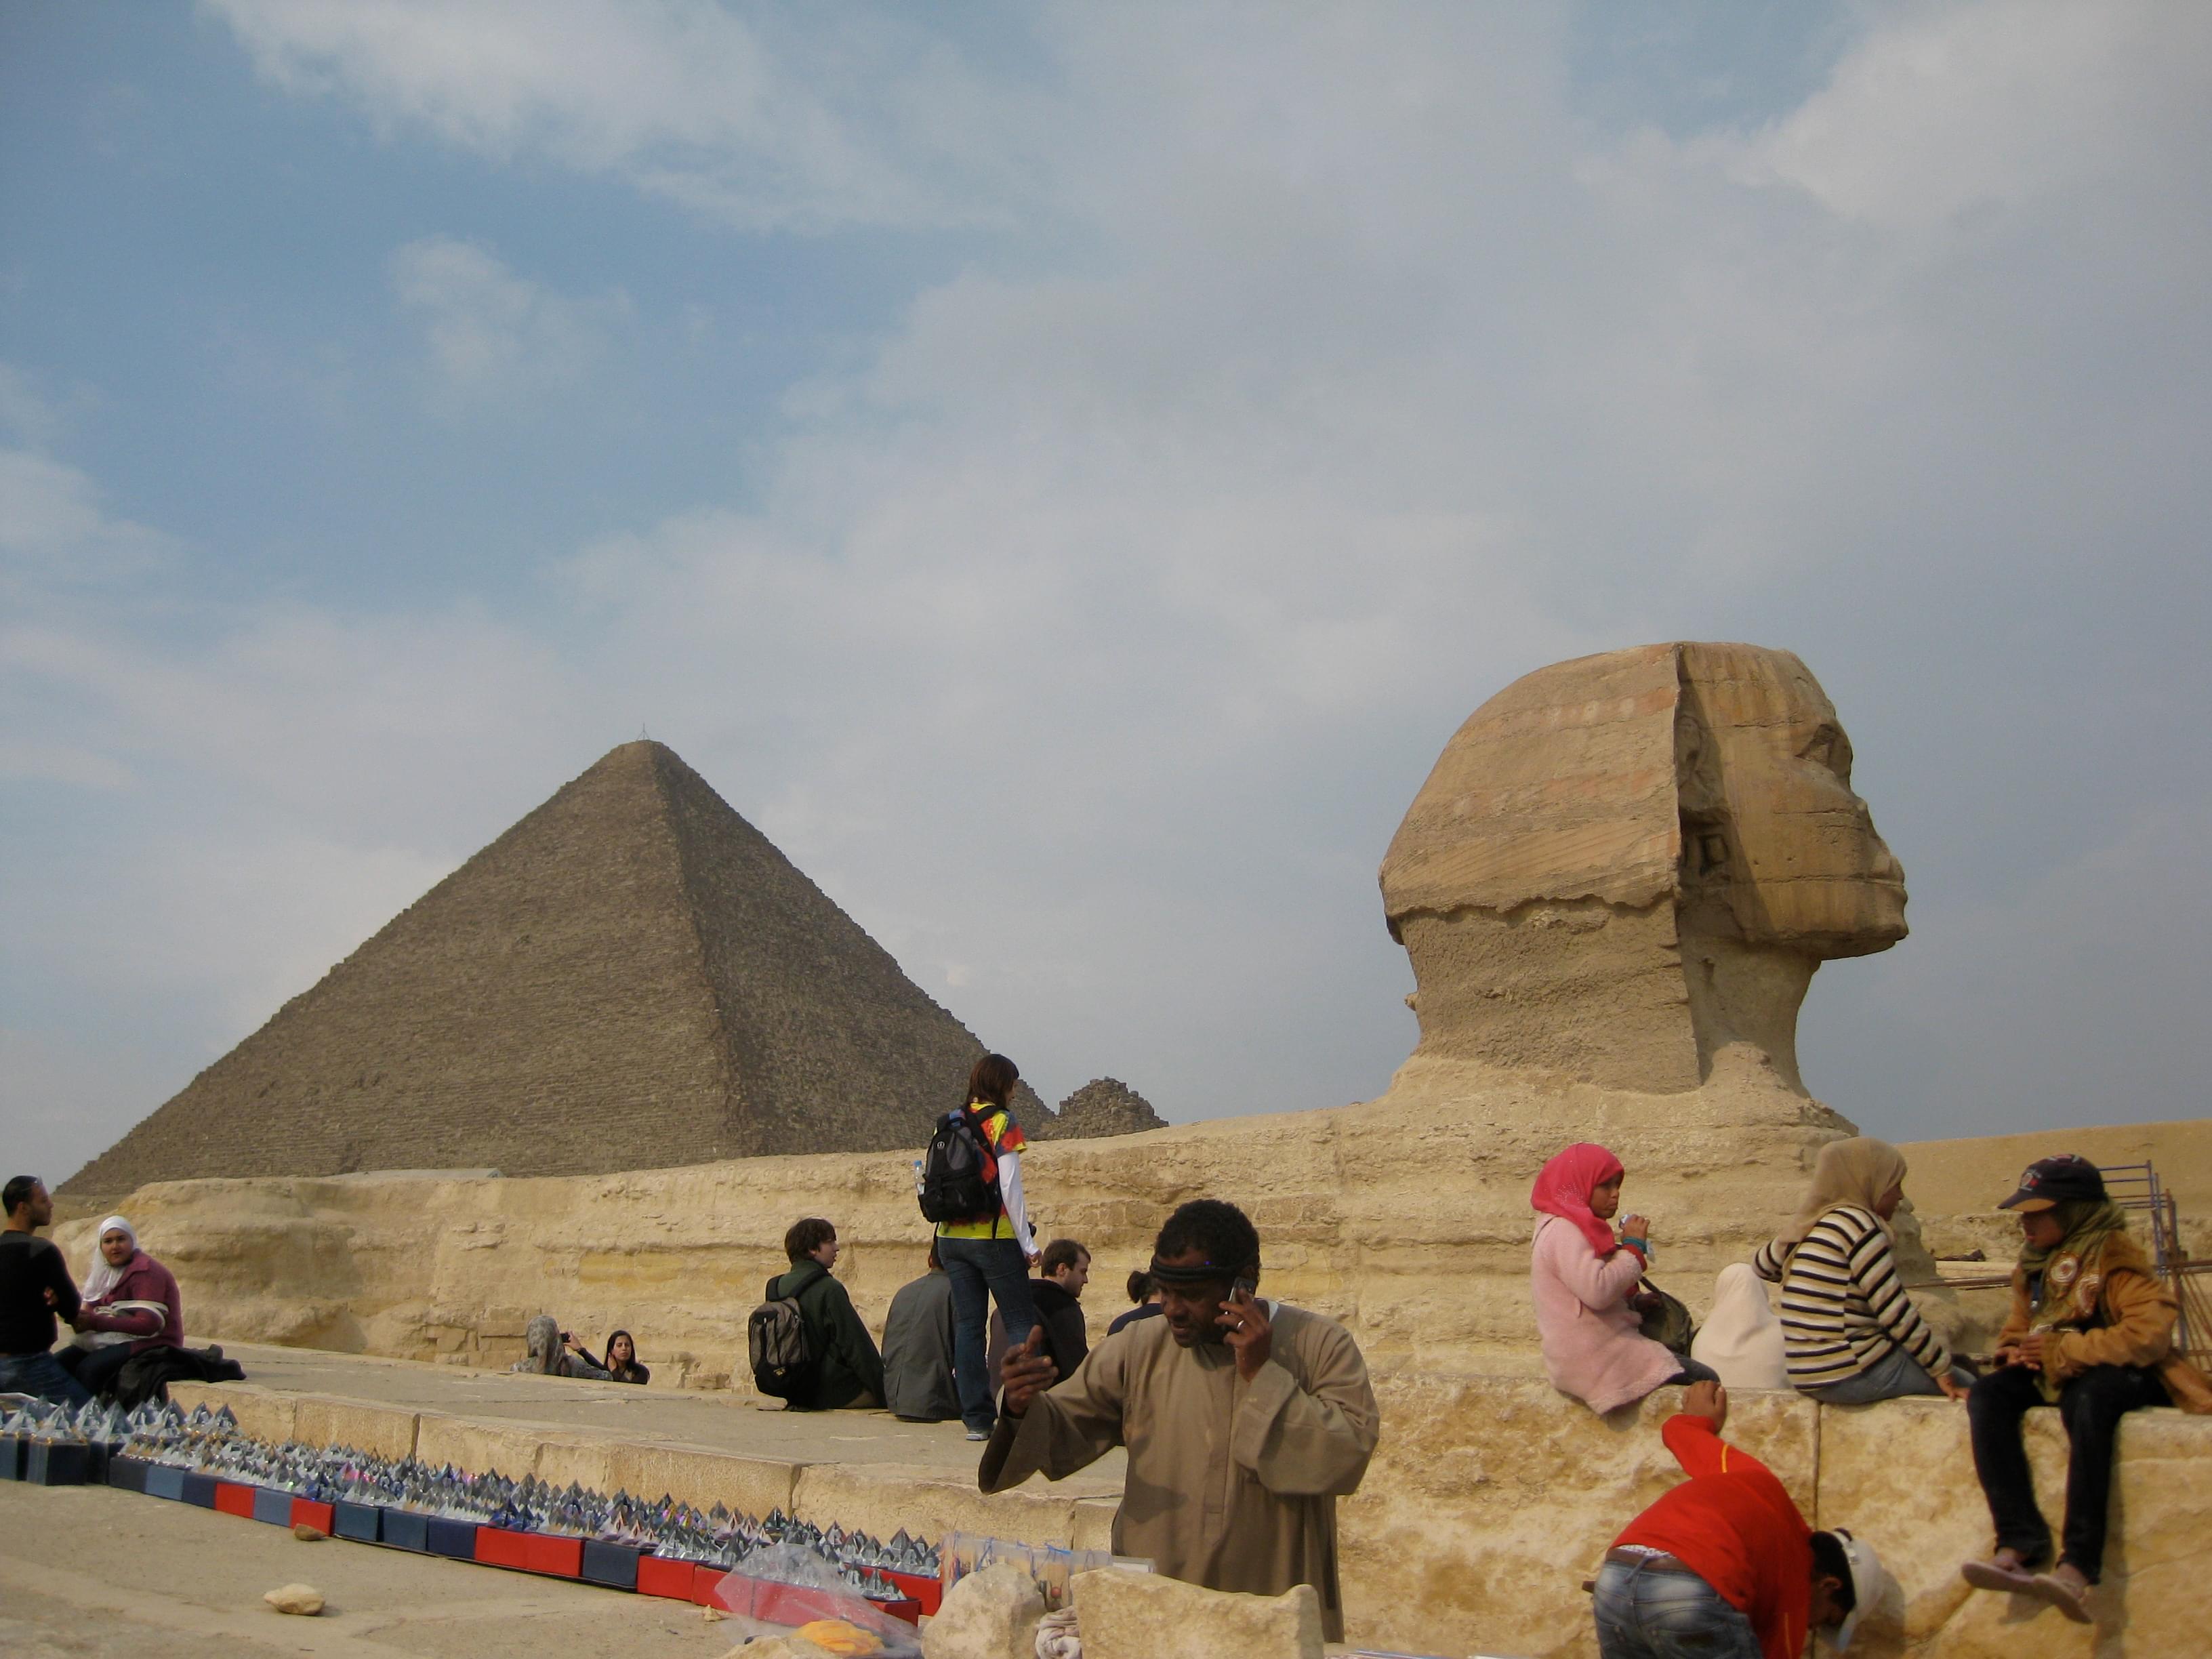 Photograph the Sphinx from Unique Angles